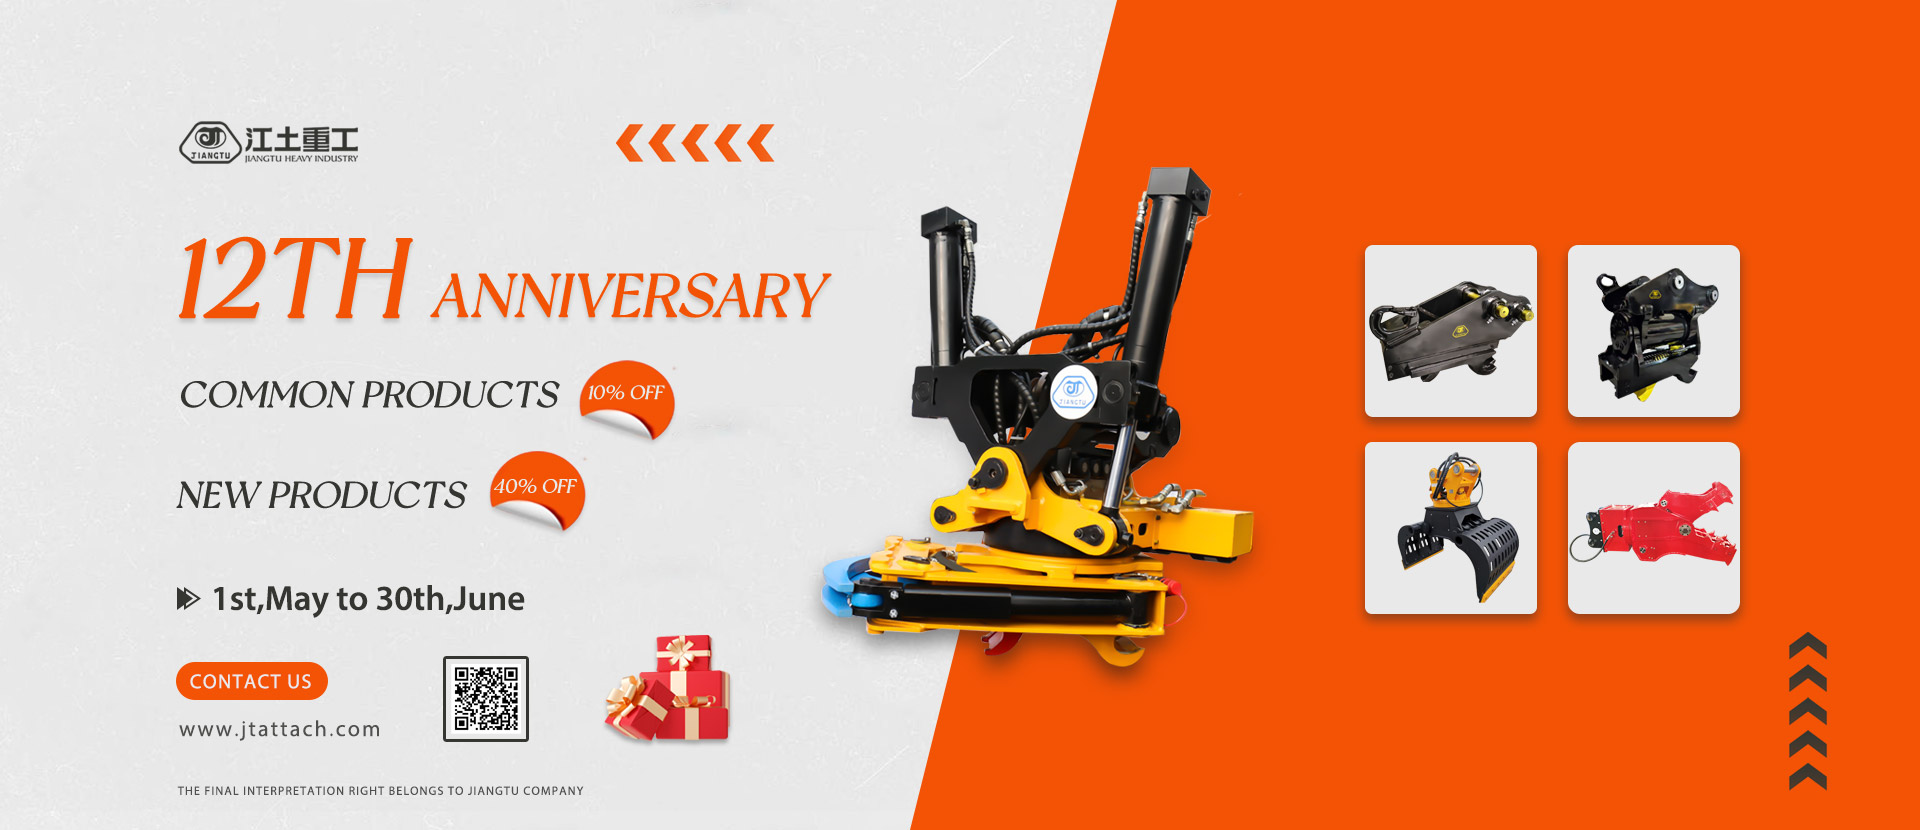 Twelve-year factory celebration promotion. Jiangtu attachments up to 10% off, new products up to 40% off!